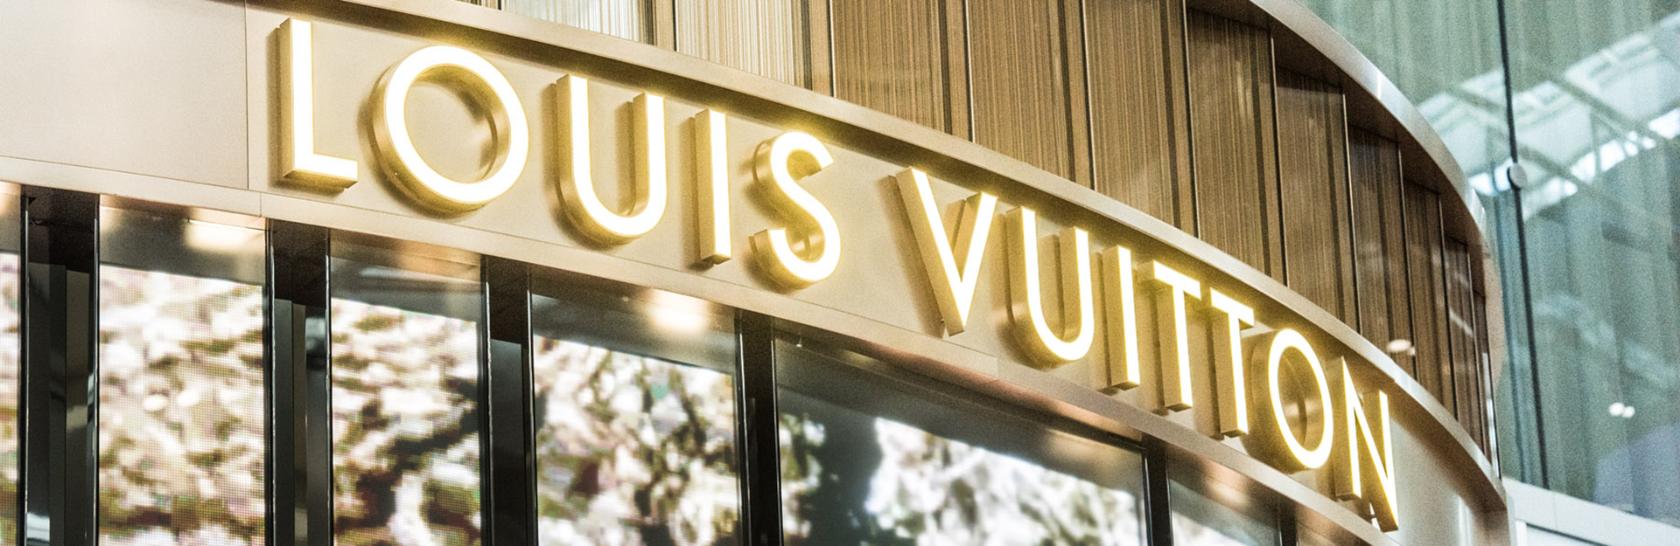 Take a look inside the new Louis Vuitton store at Singapore Changi